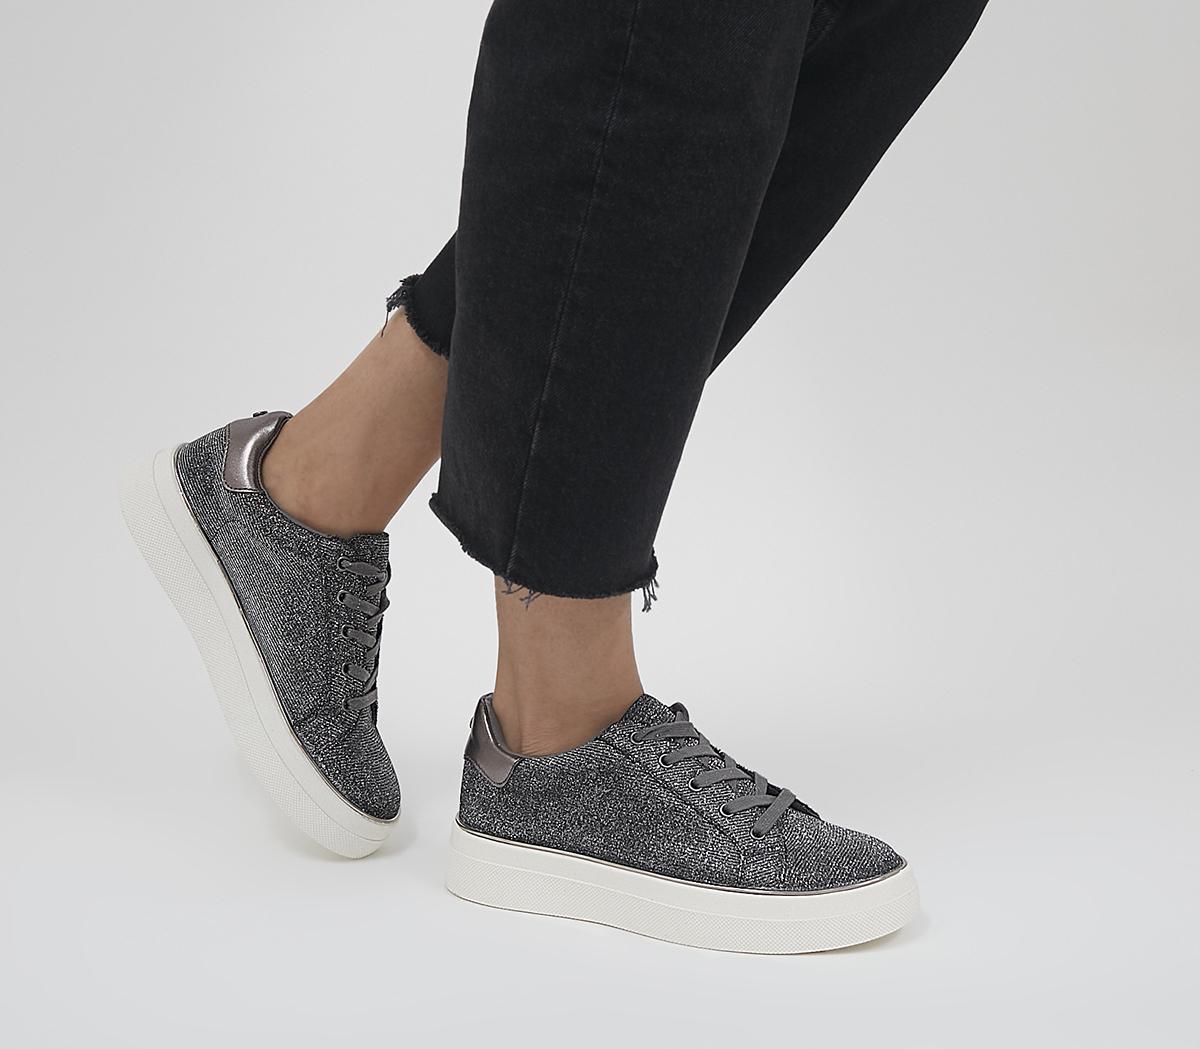 OfficeFaded Flatform Lace Up TrainersPewter Glitter